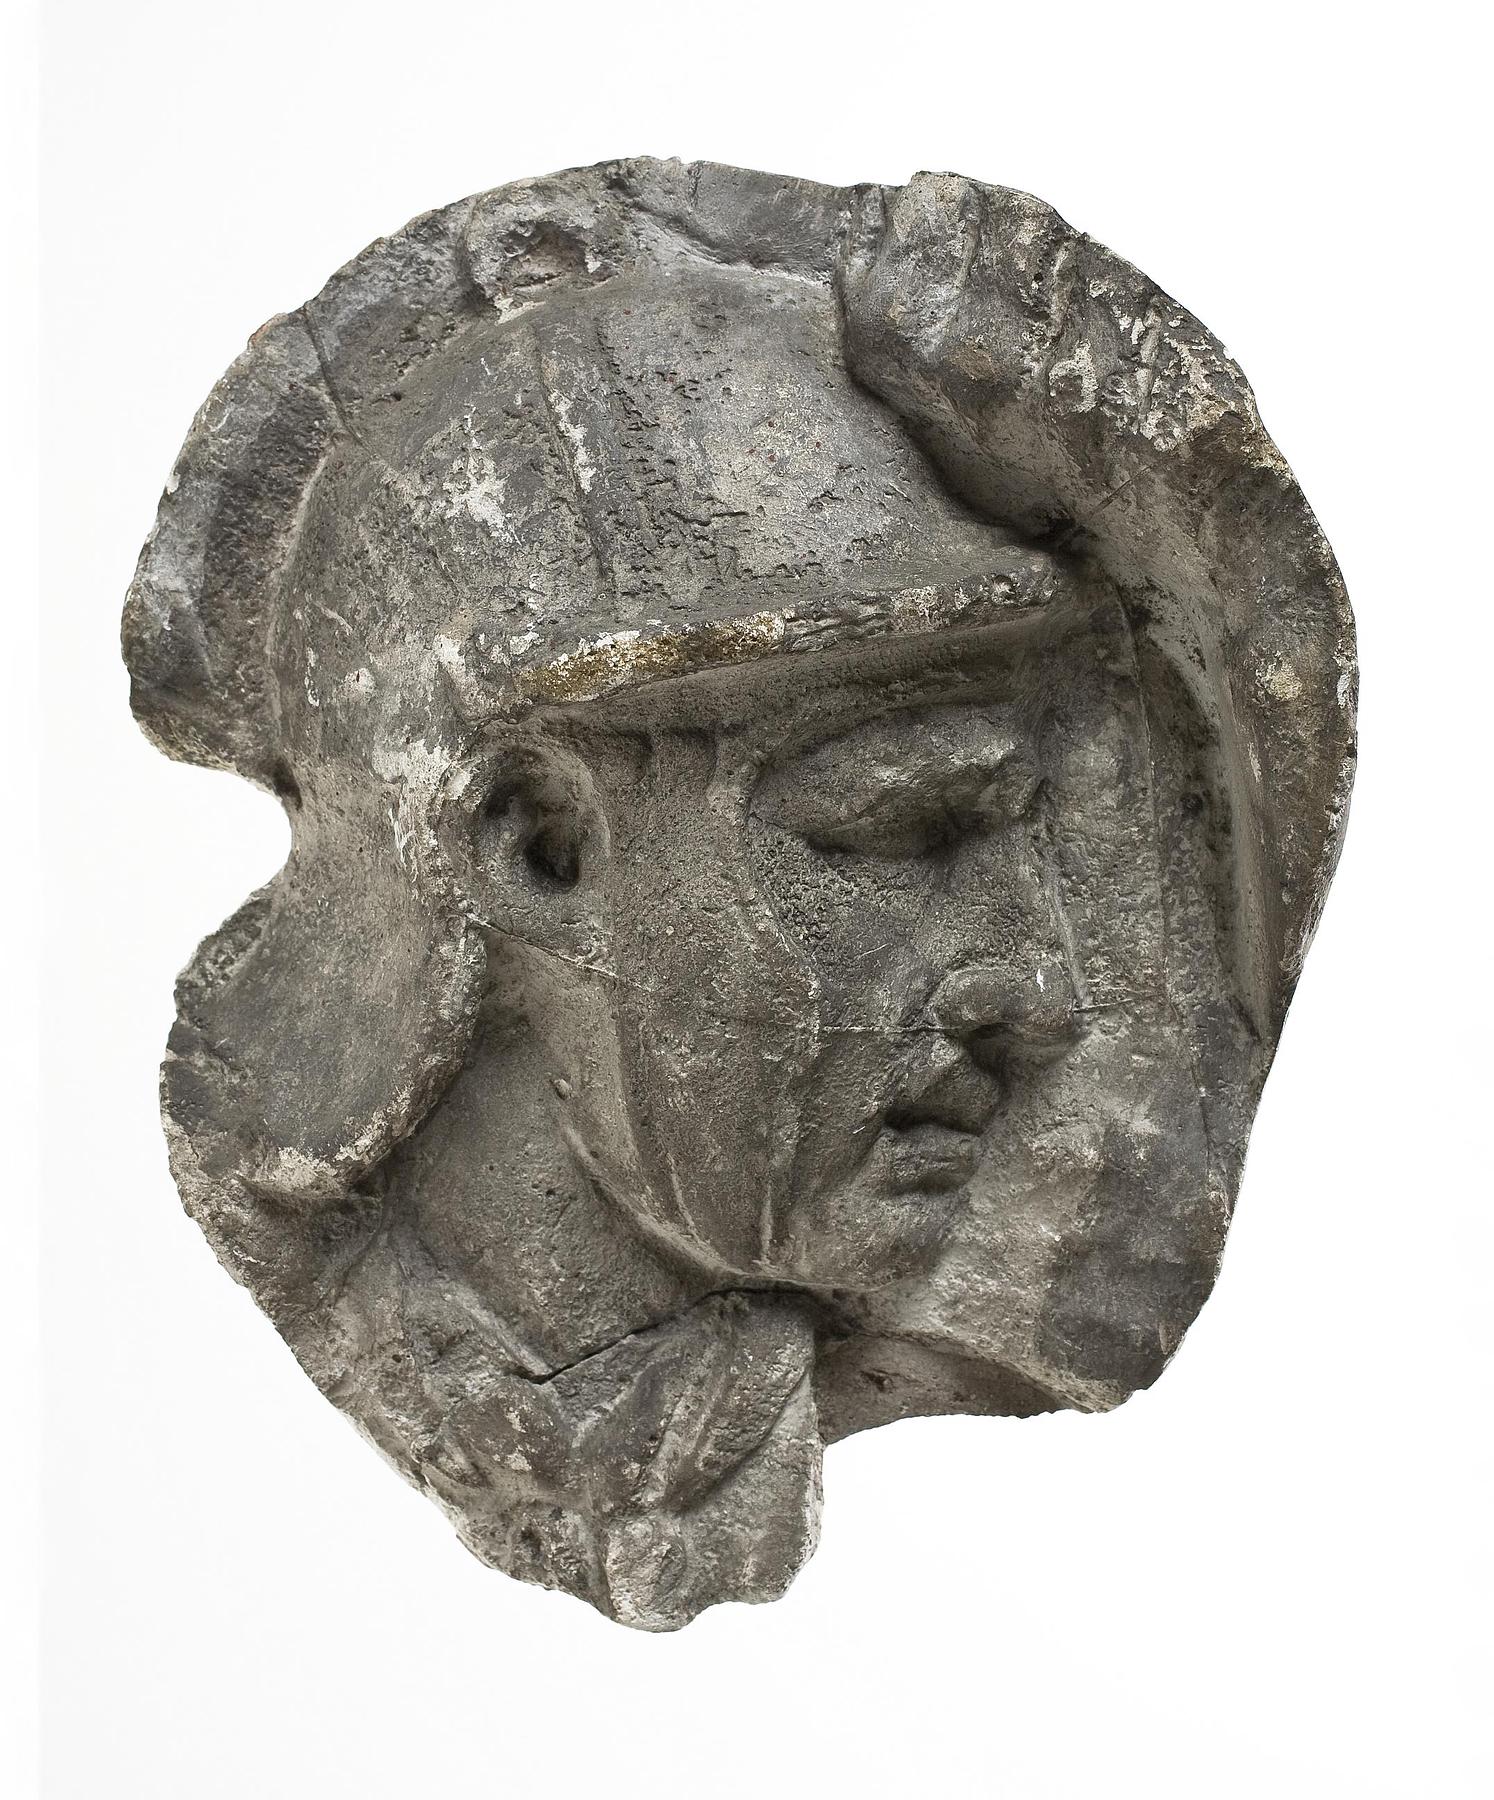 Head of a helmeted Roman auxiliary, L326a